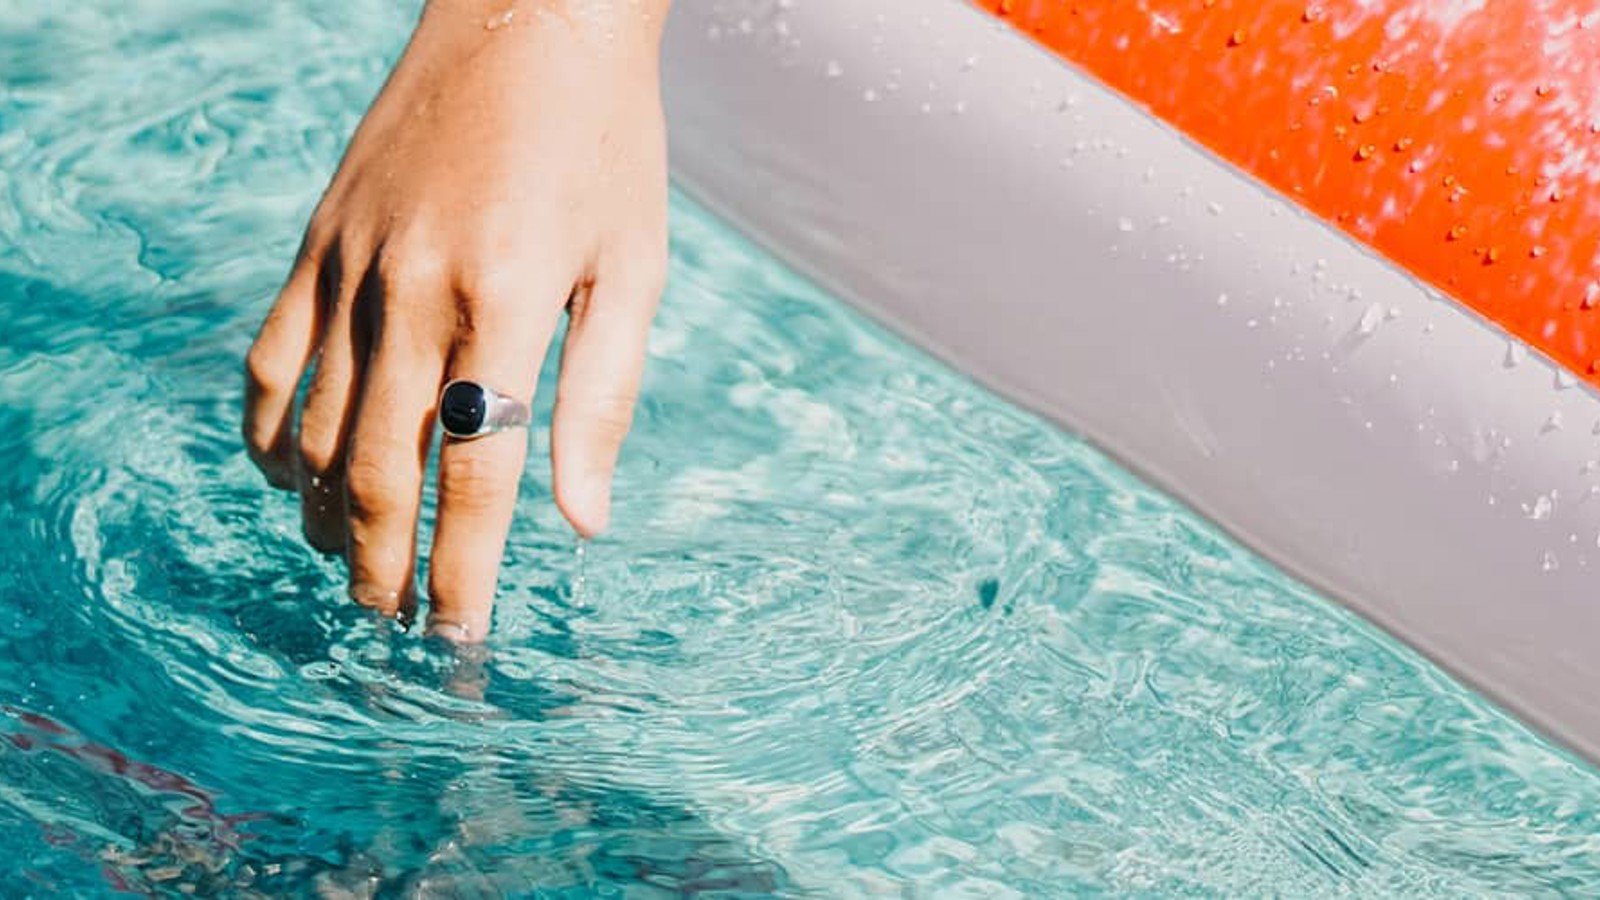 Hand dipping fingers in a pool